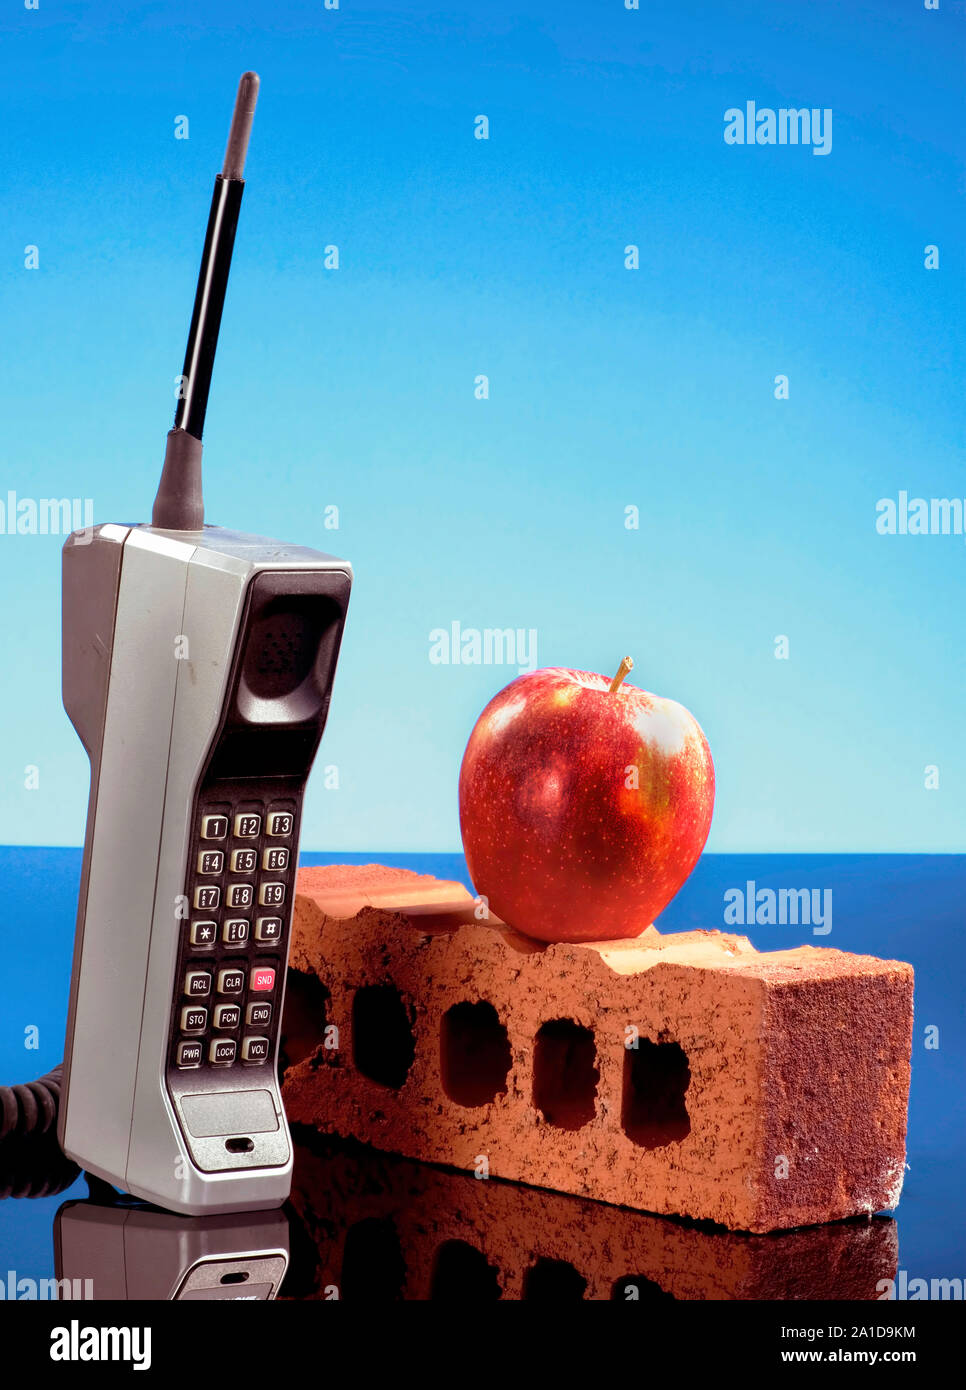 Old cell phone called the brick phone with a red apple made in the early 1980's. Stock Photo